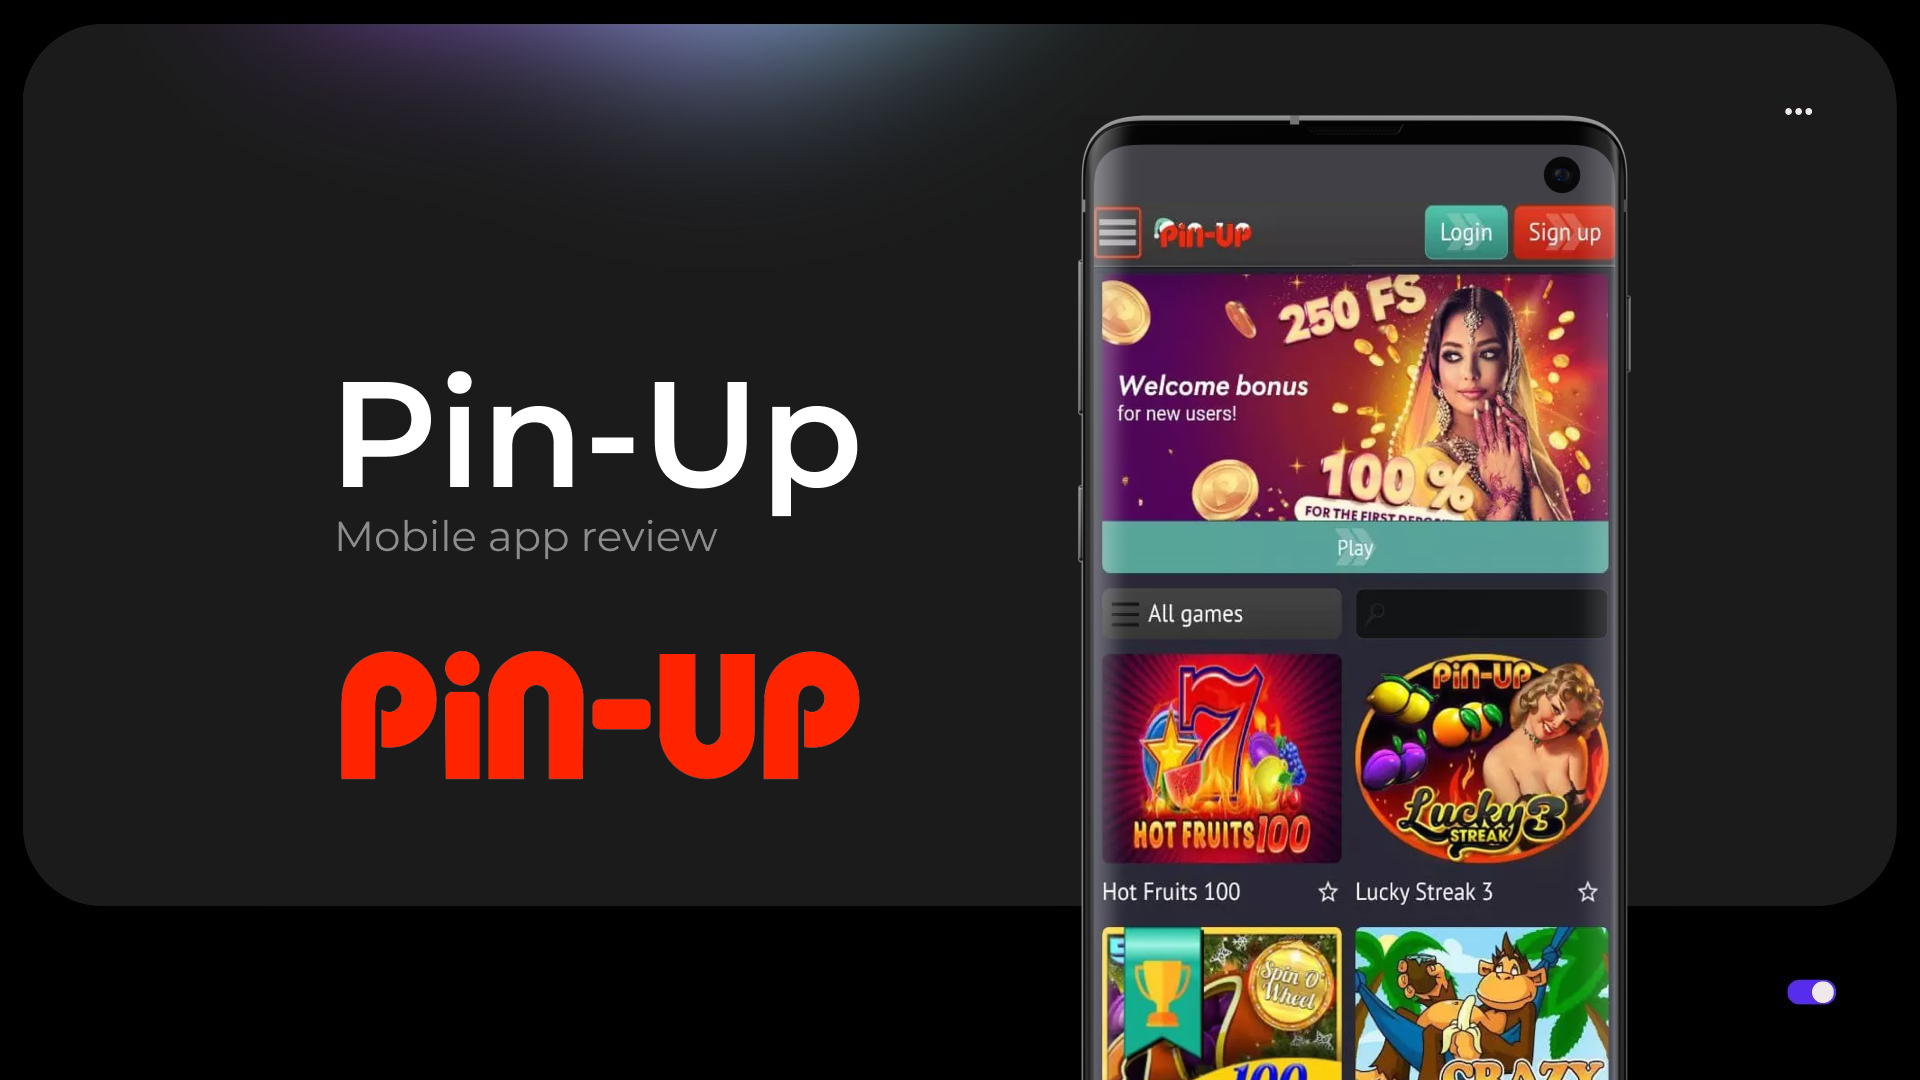 Information about Pin-up App in general